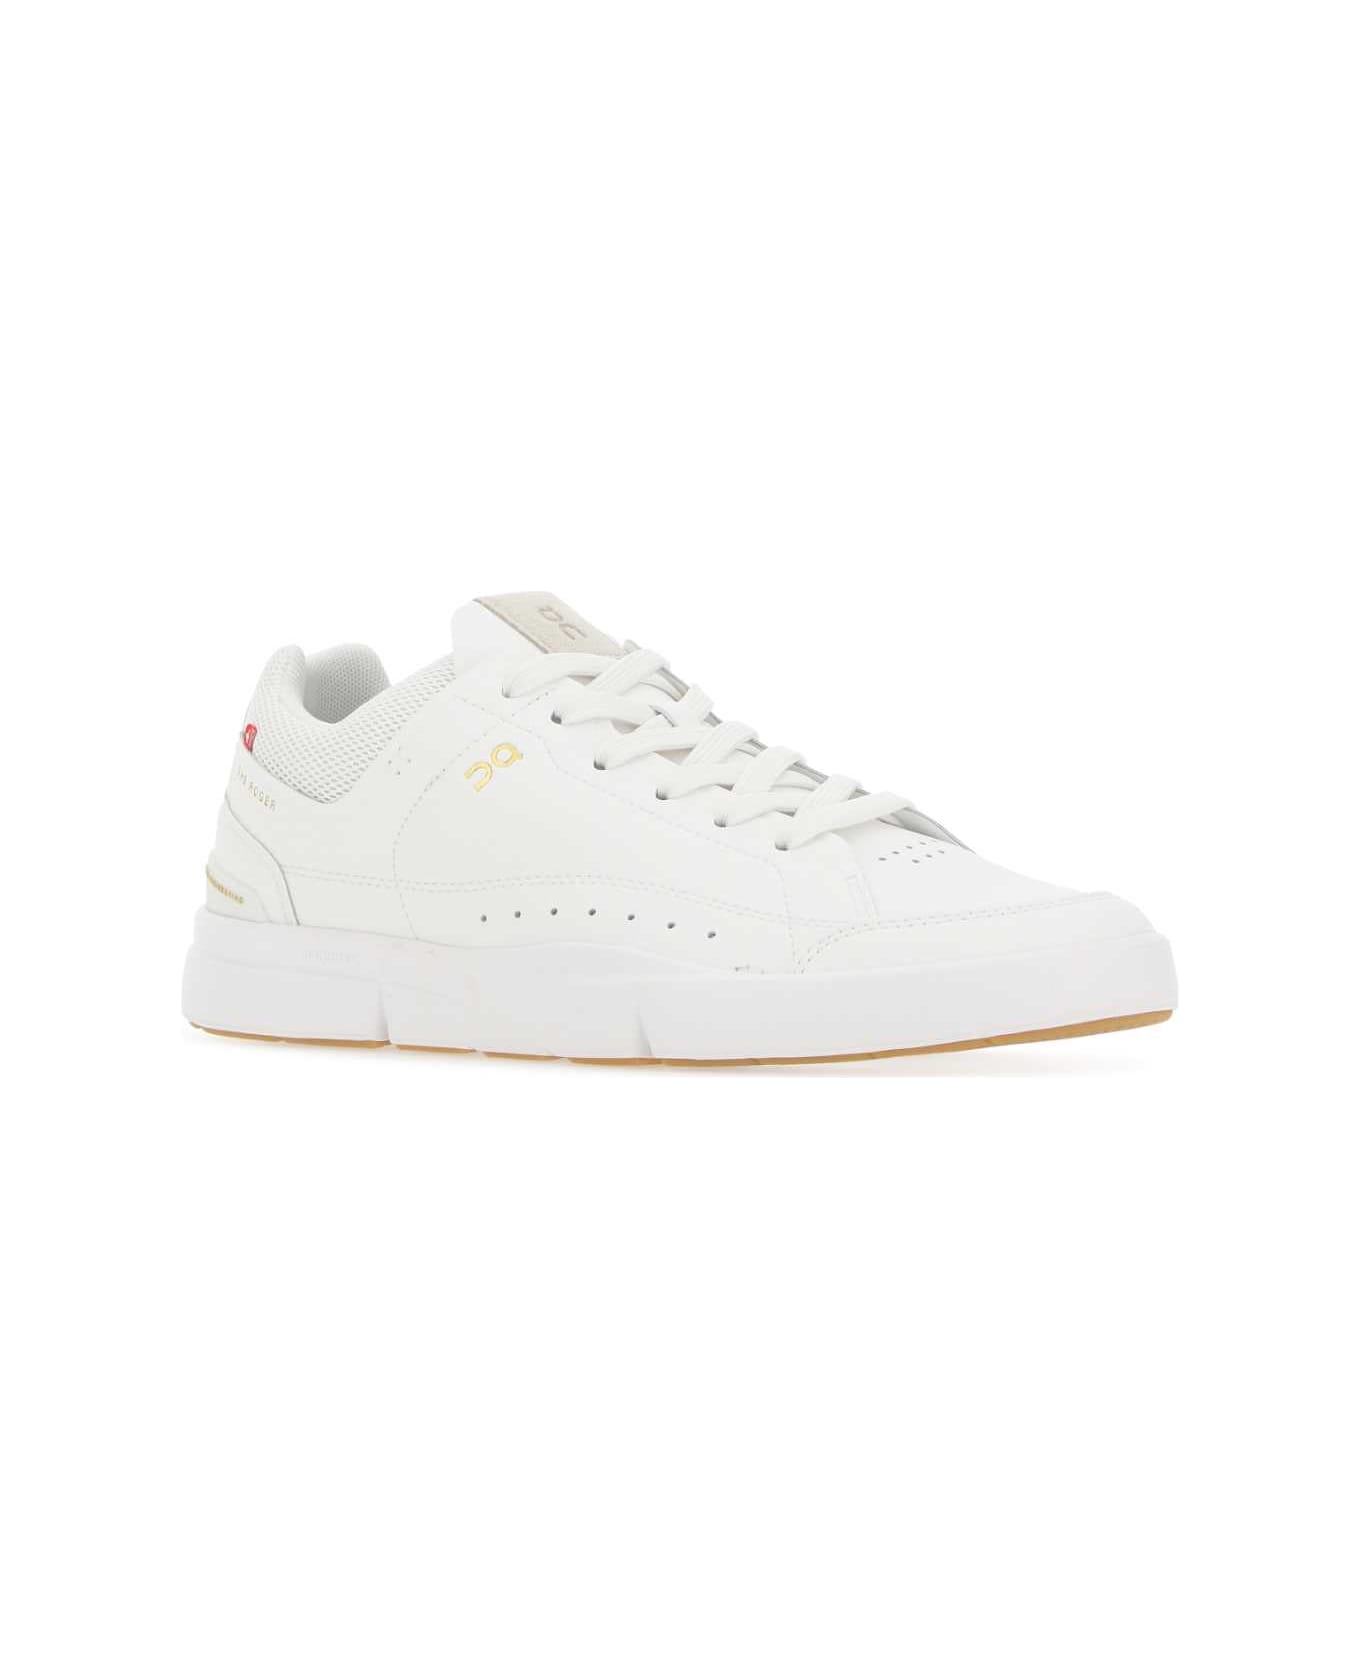 ON White Synthetic Leather And Fabric The Roger Center Court Sneakers - WHITEGUM